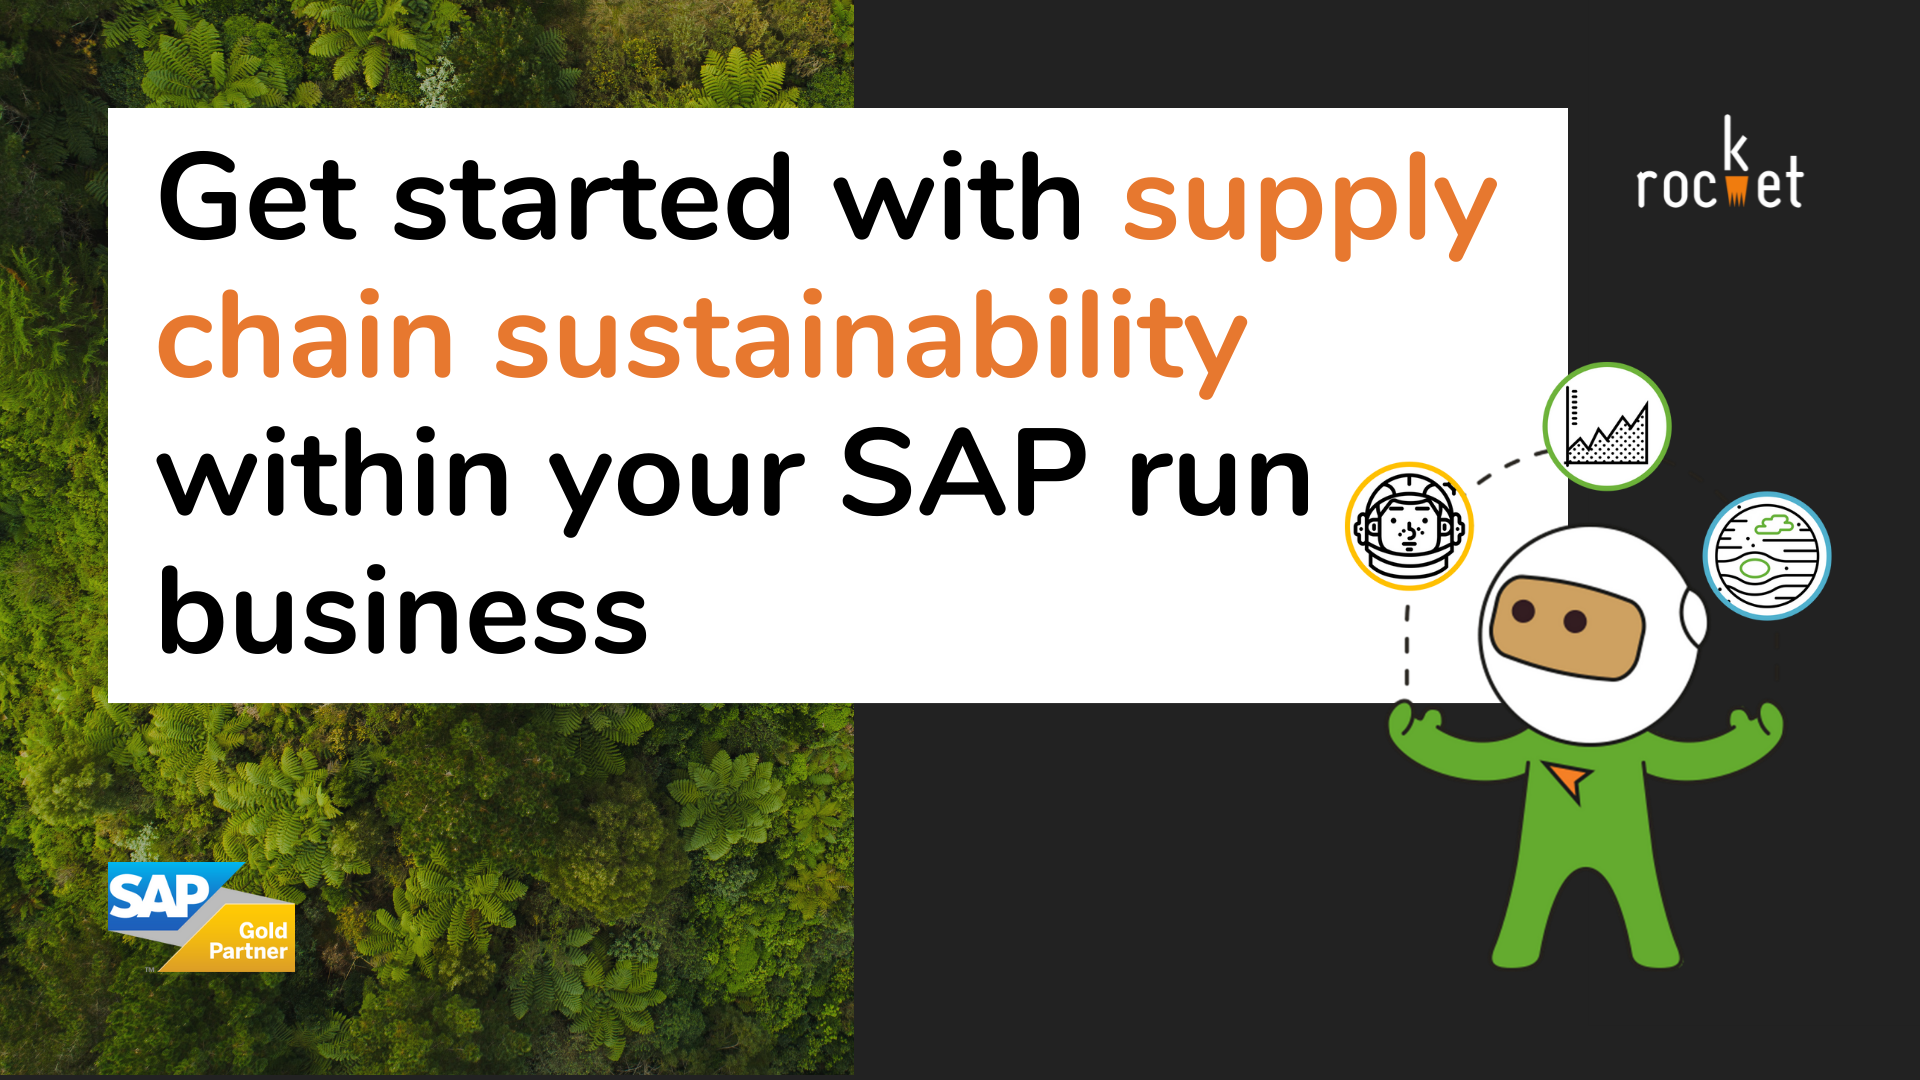 SAP Supply Chain Sustainability 30 Second Videos-1